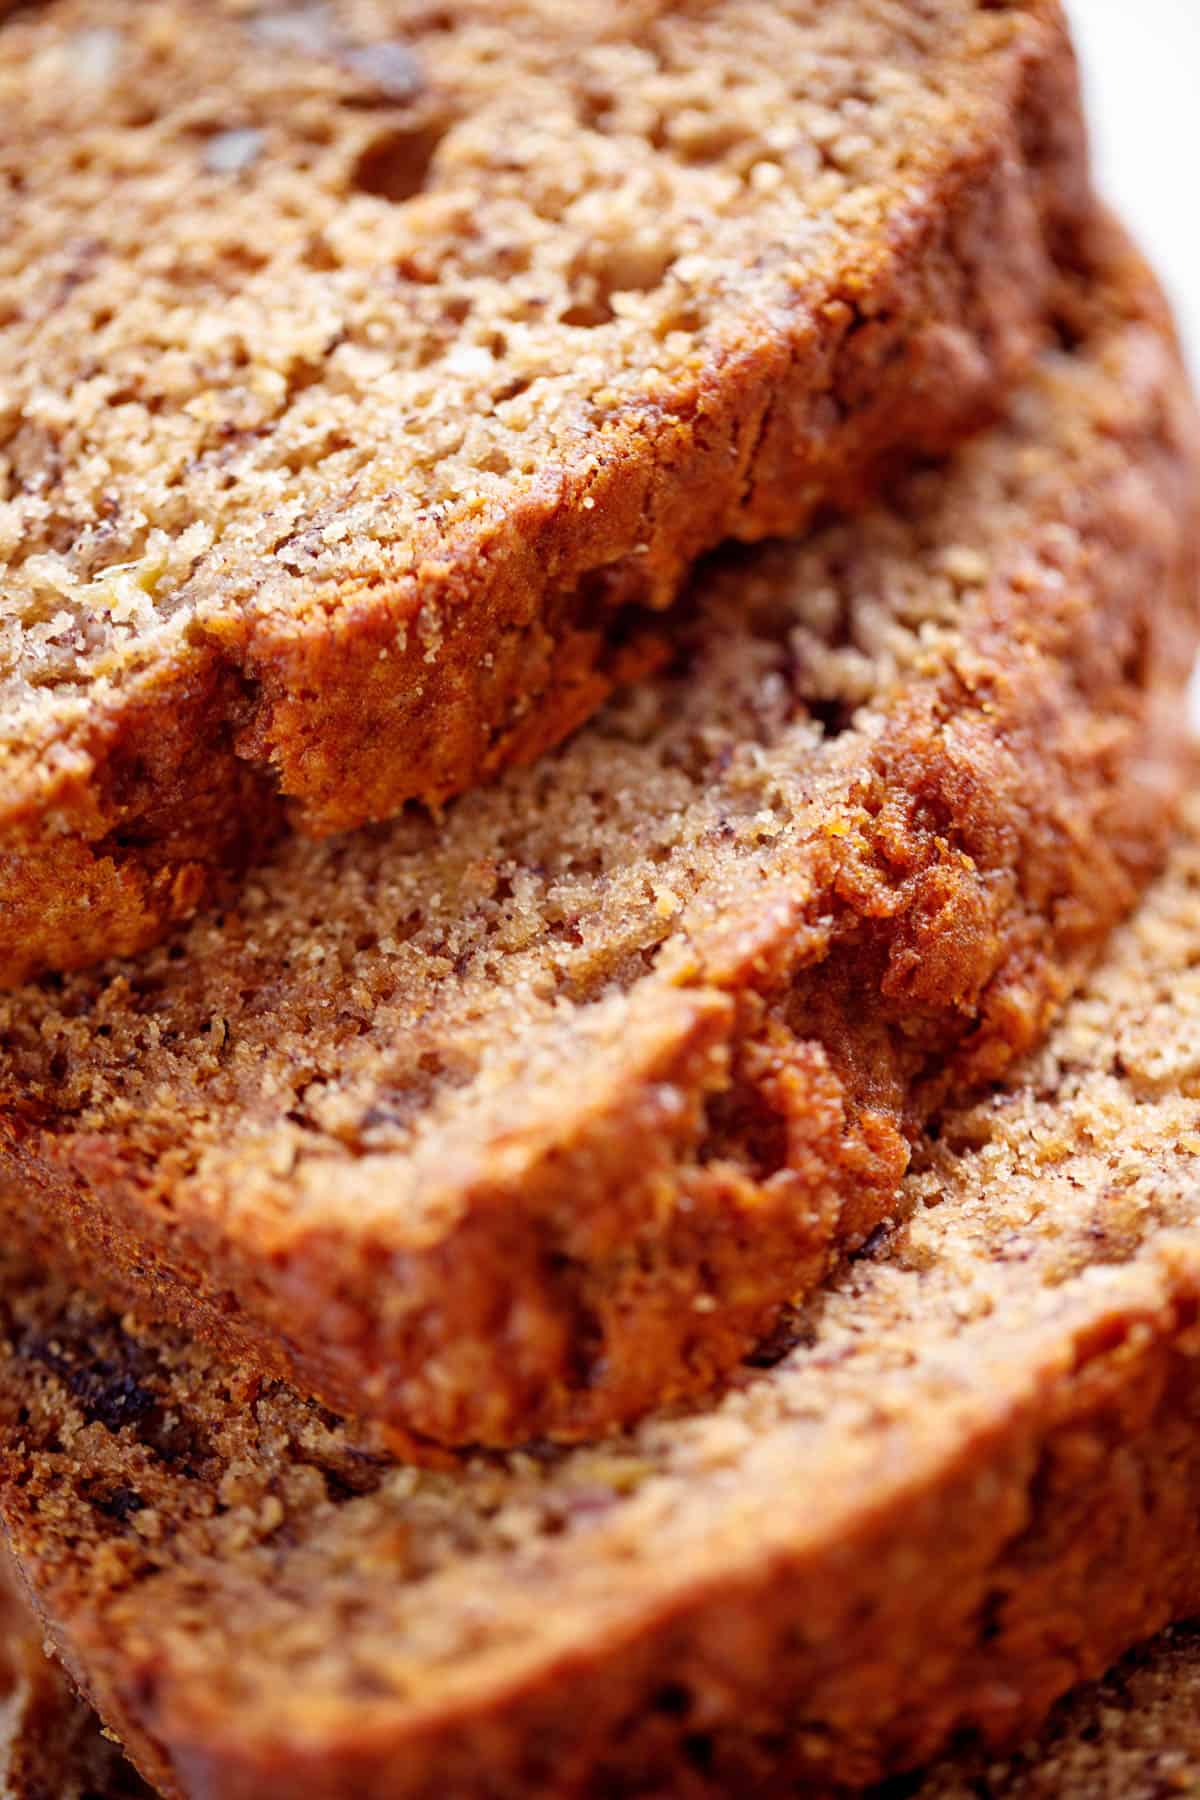 Moist banana bread sliced: the best soft bread to go with your morning coffee | craveitall.com